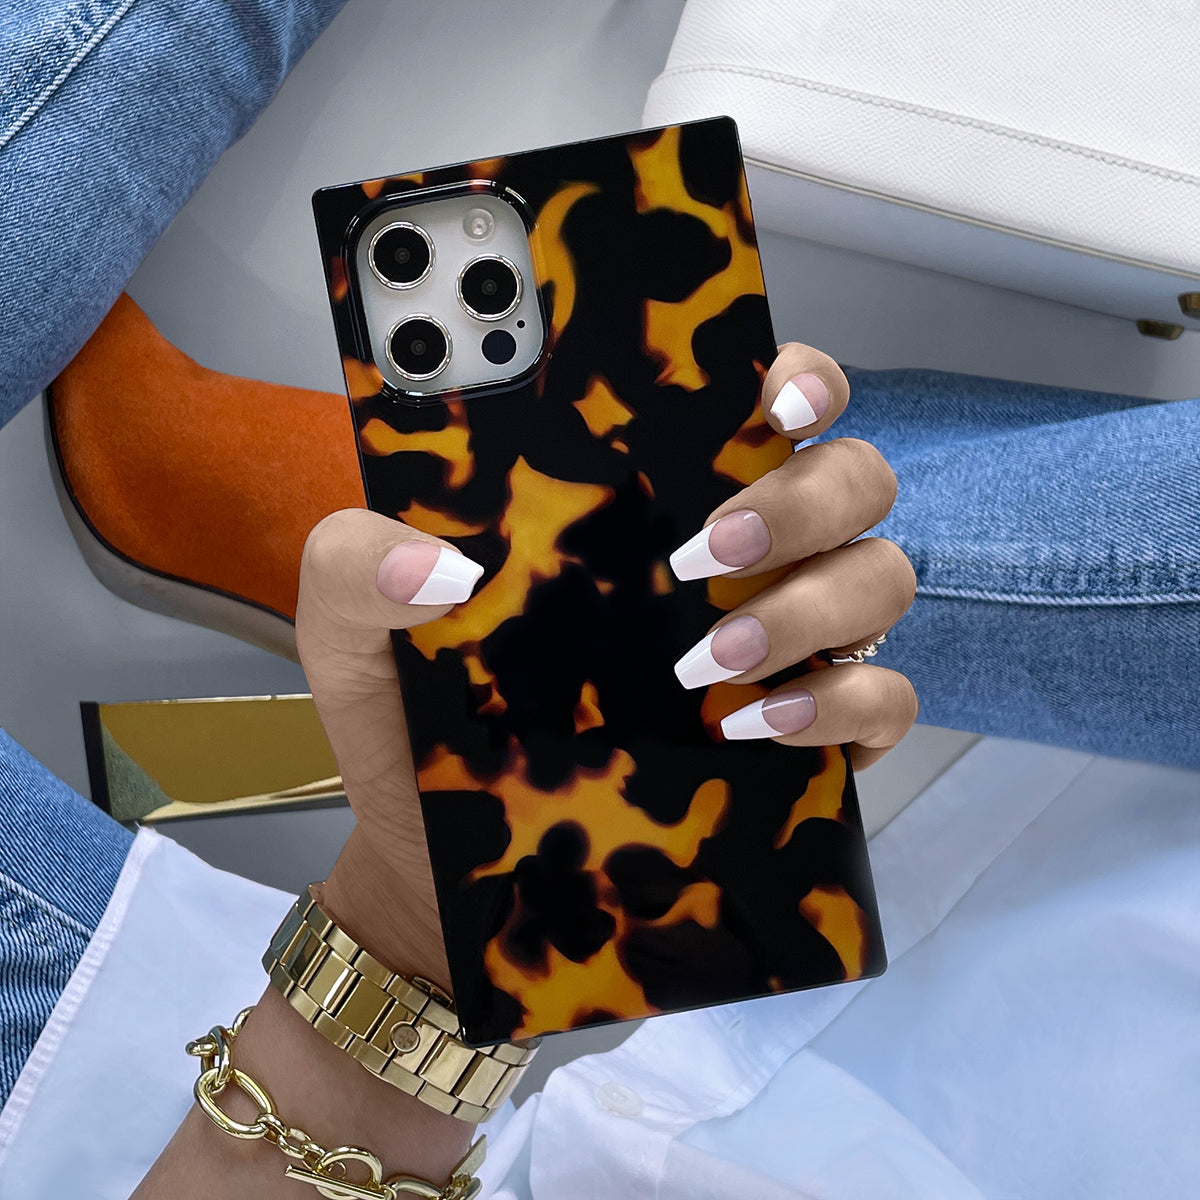 Chic Square Apple iPhone Cases: Diverse Designs, Styles, and Colors